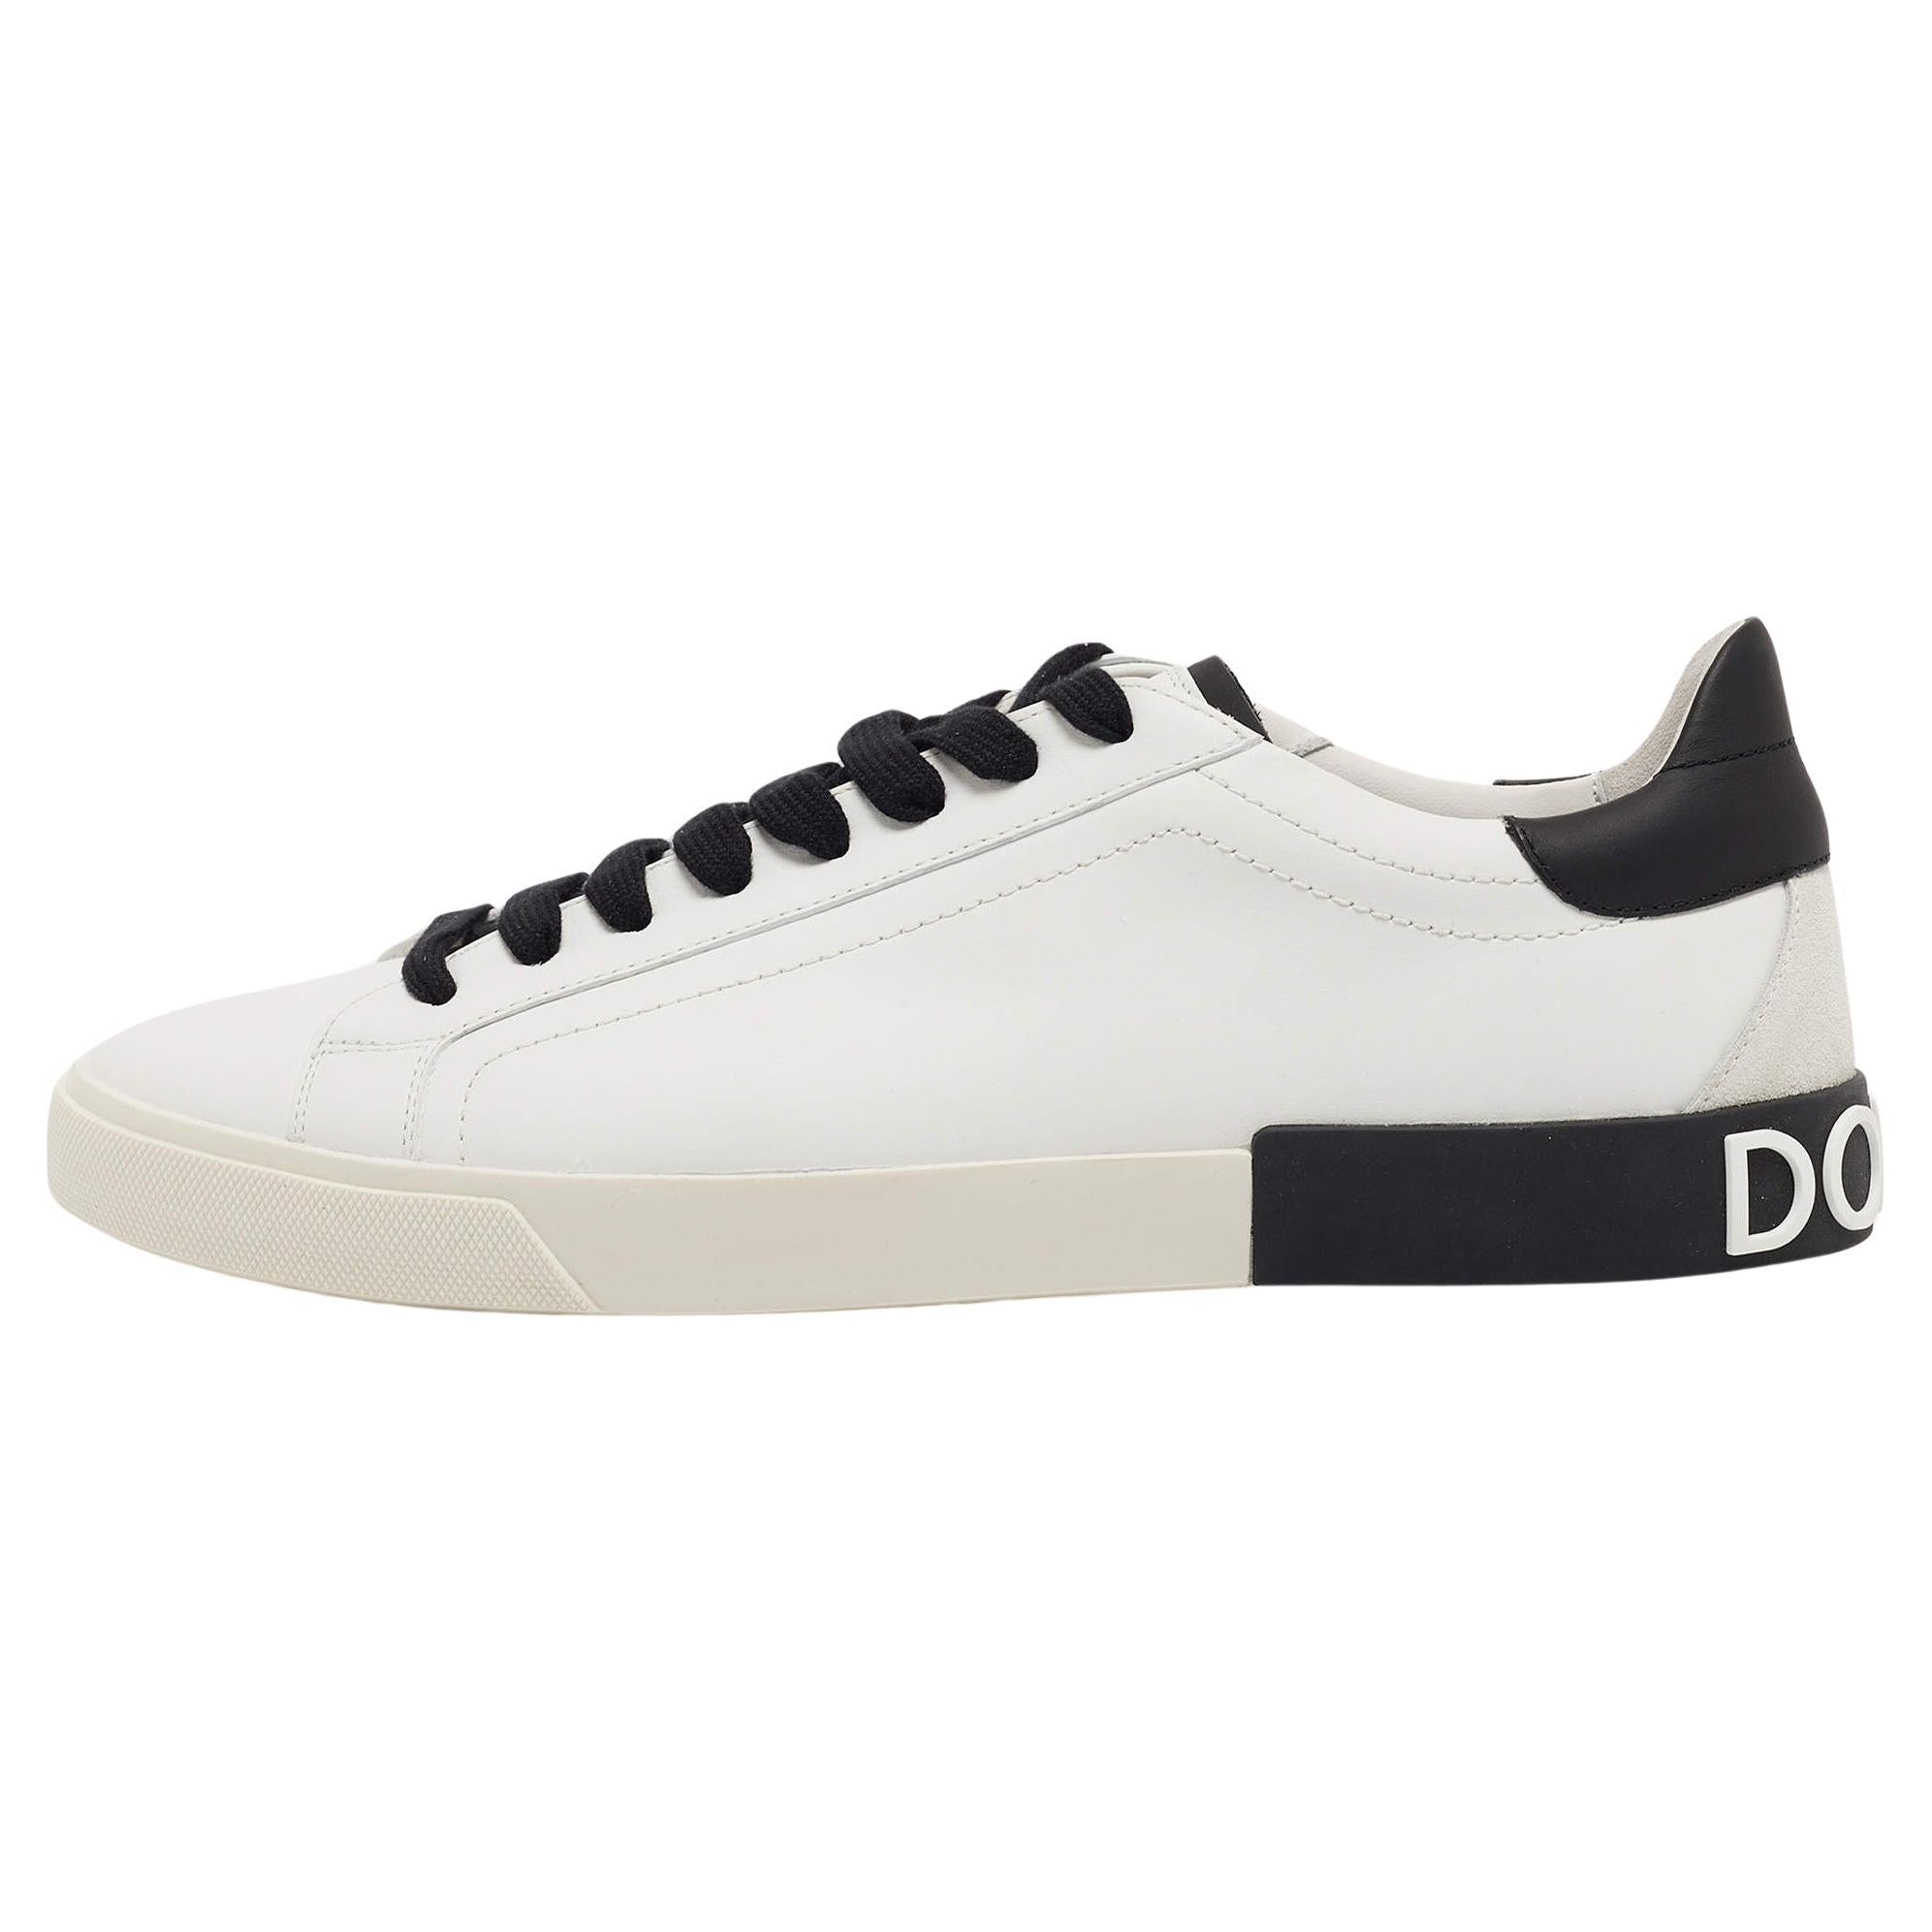 Dolce & Gabbana White/Black Leather Low Top Sneakers Size 45